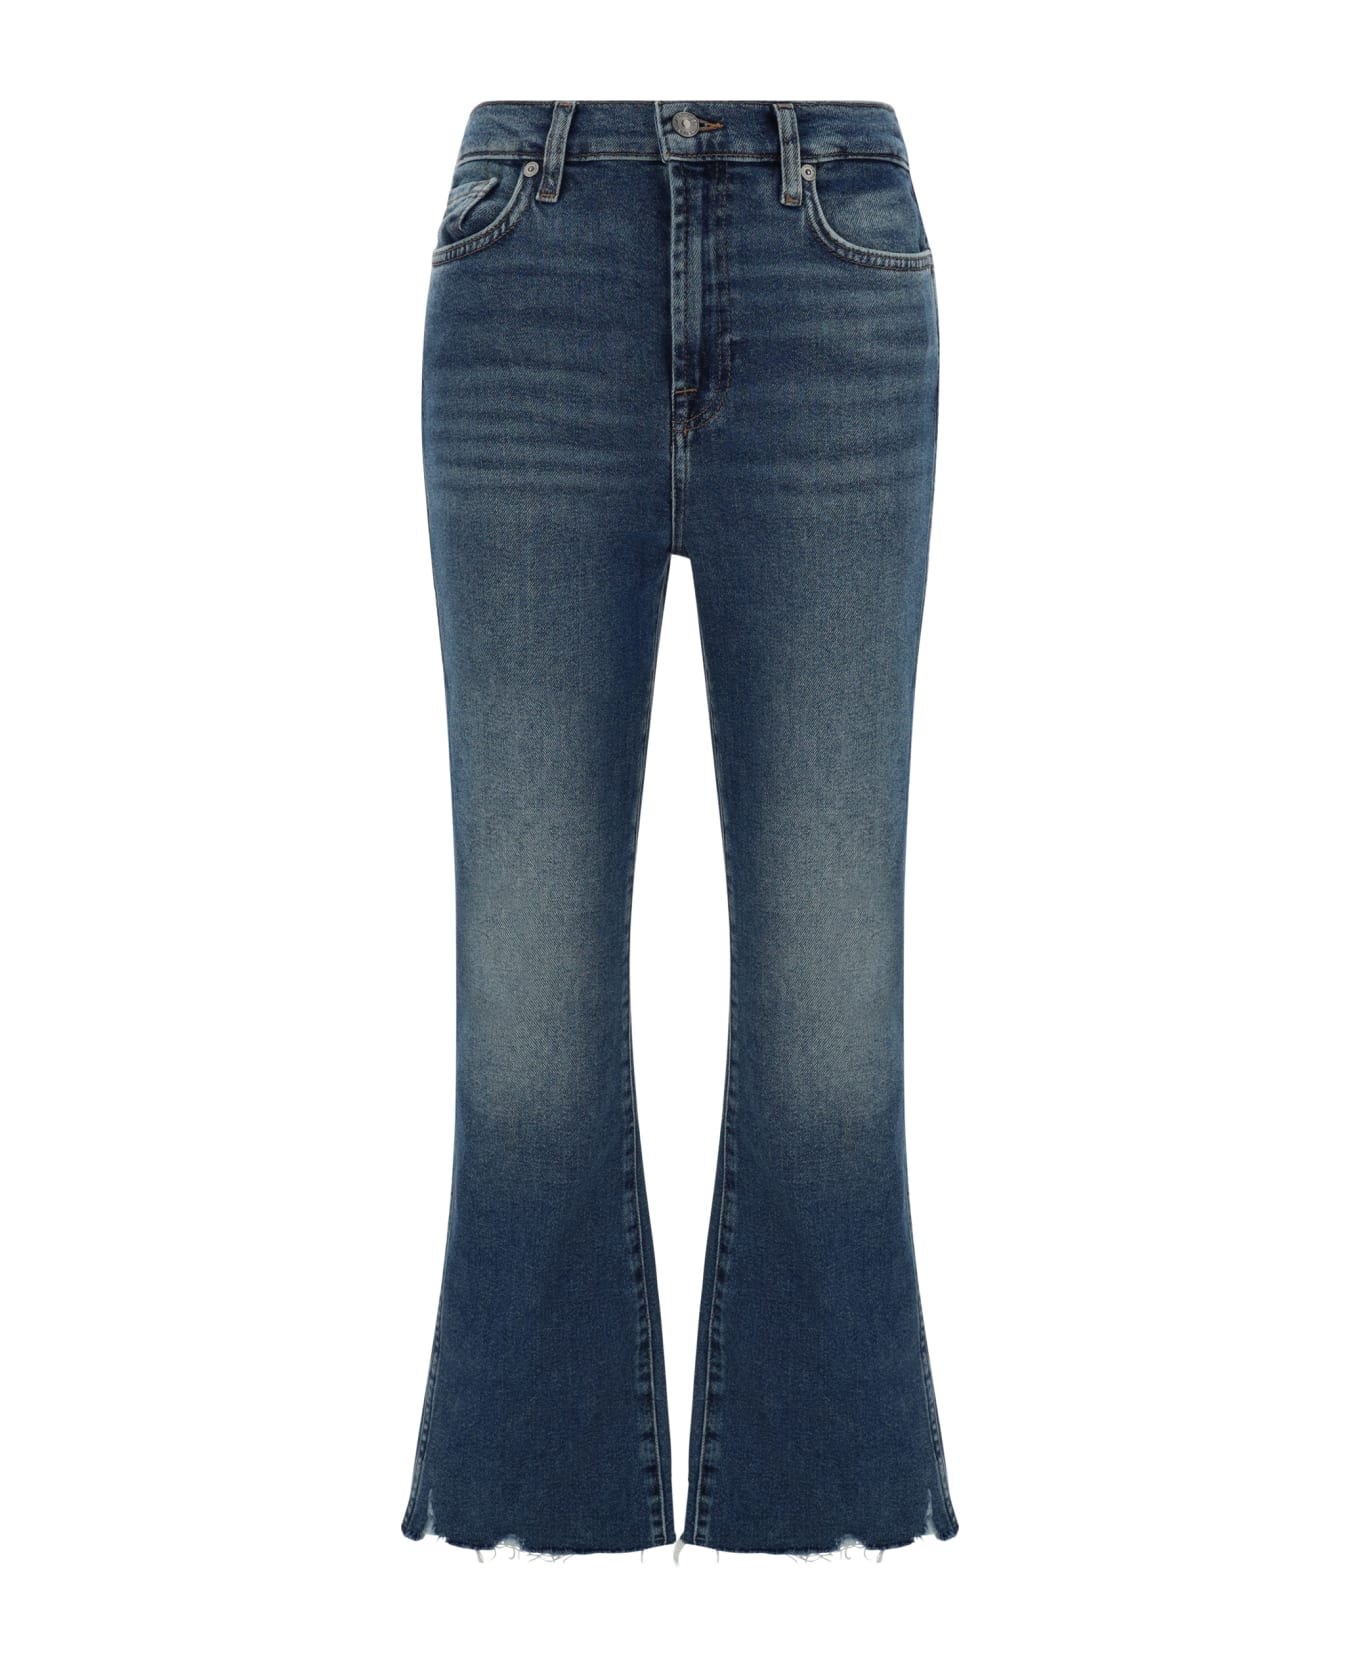 7 For All Mankind Kick Luxe Jeans - Dark Blue